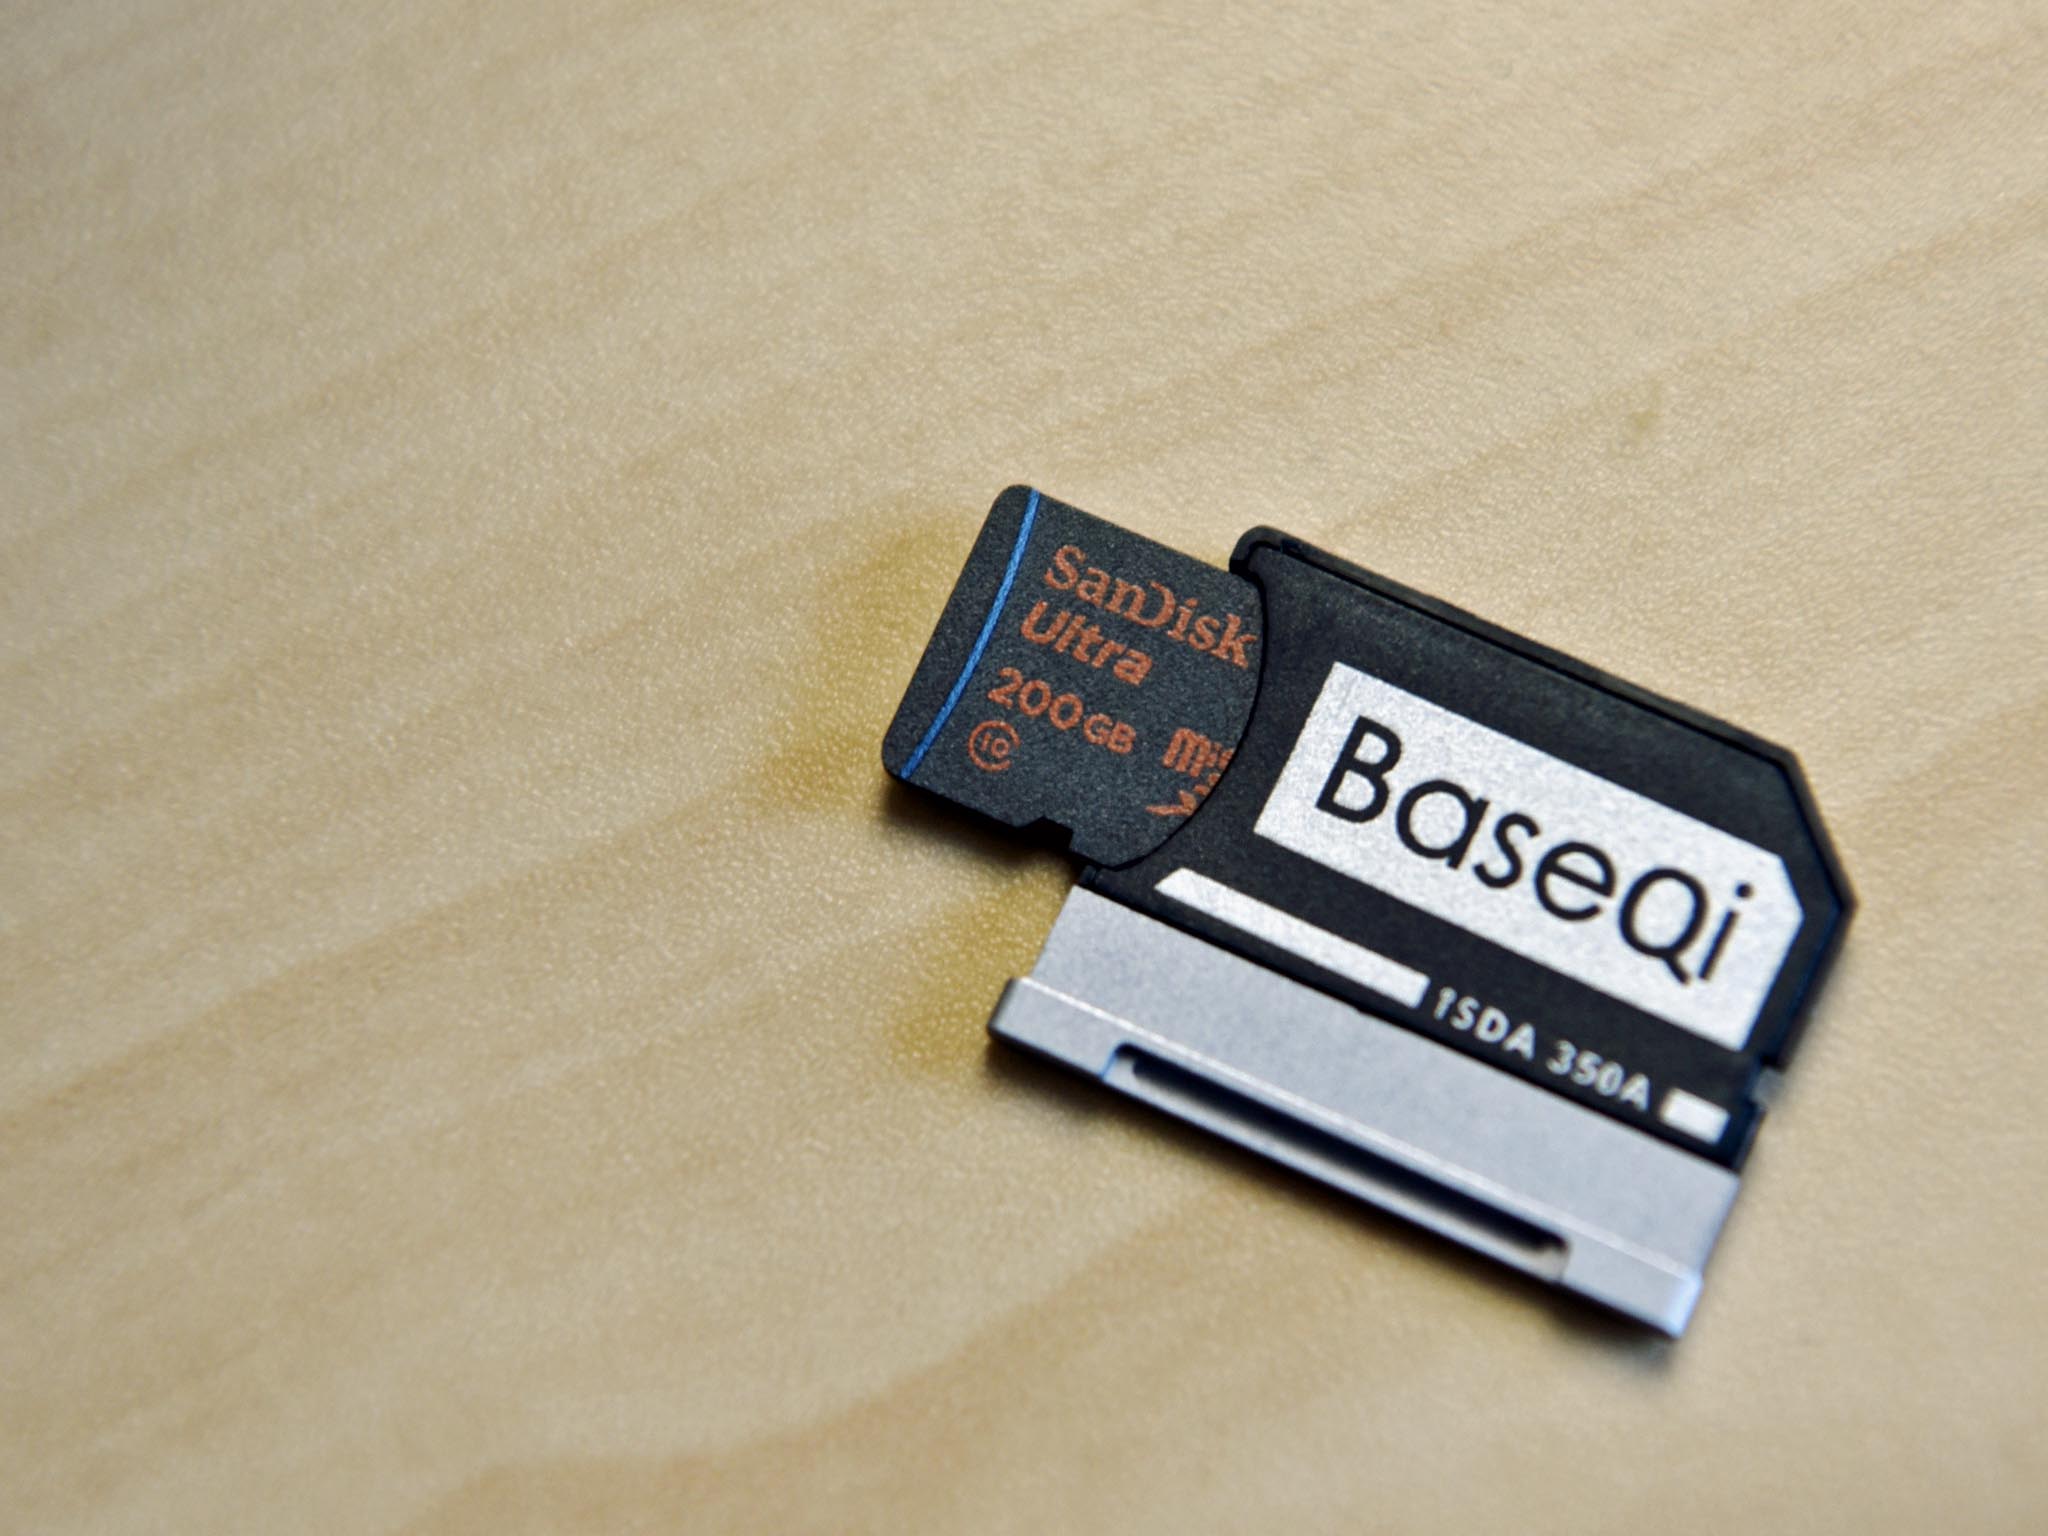 Slide the microSD card into the adapter.